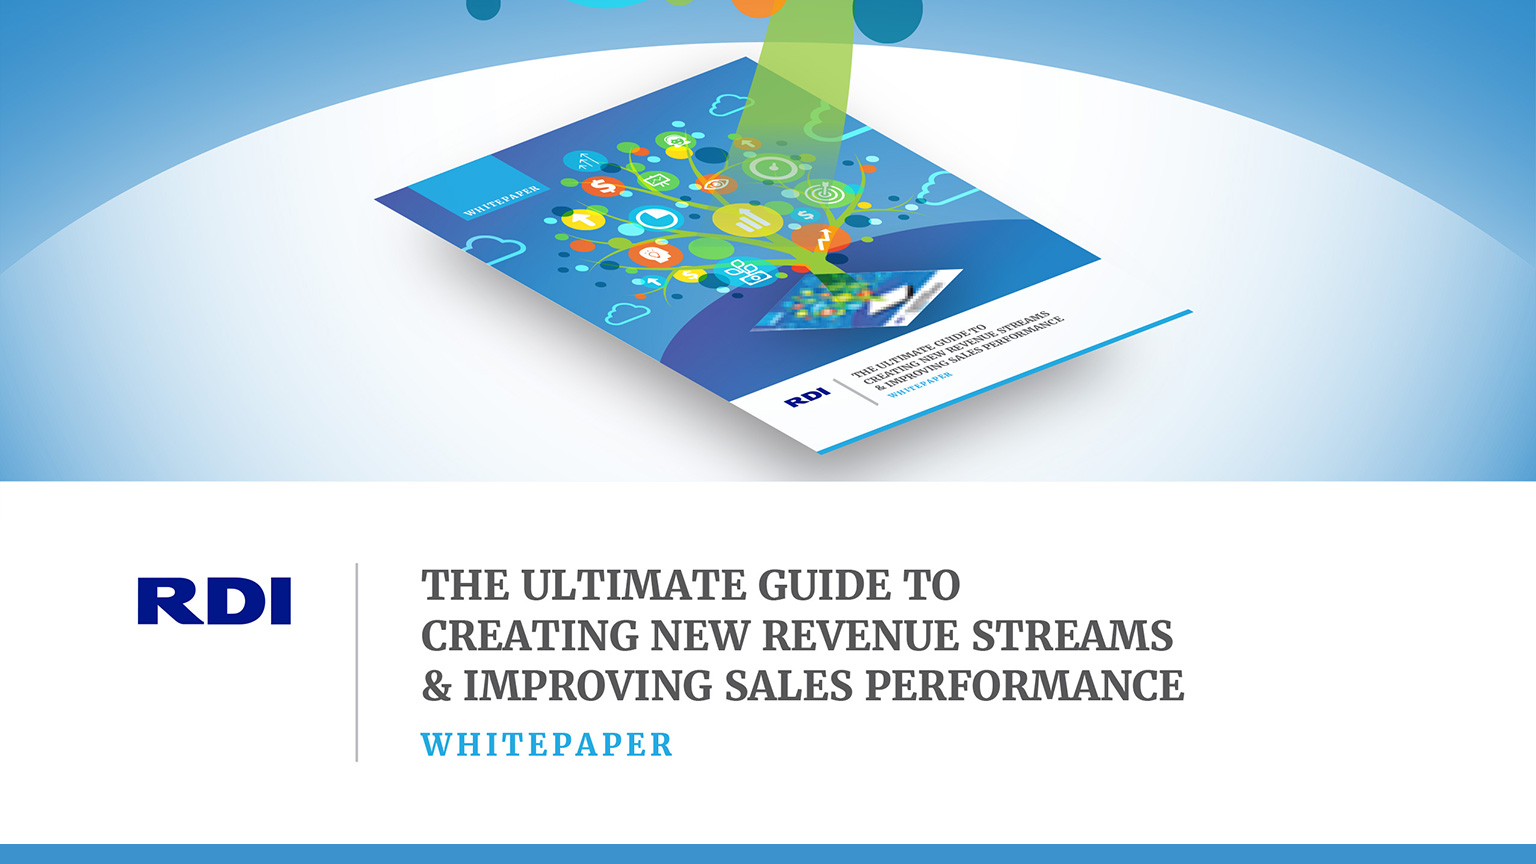 The Ultimate Guide to Creating New Revenue Streams & Improving Sales Performance